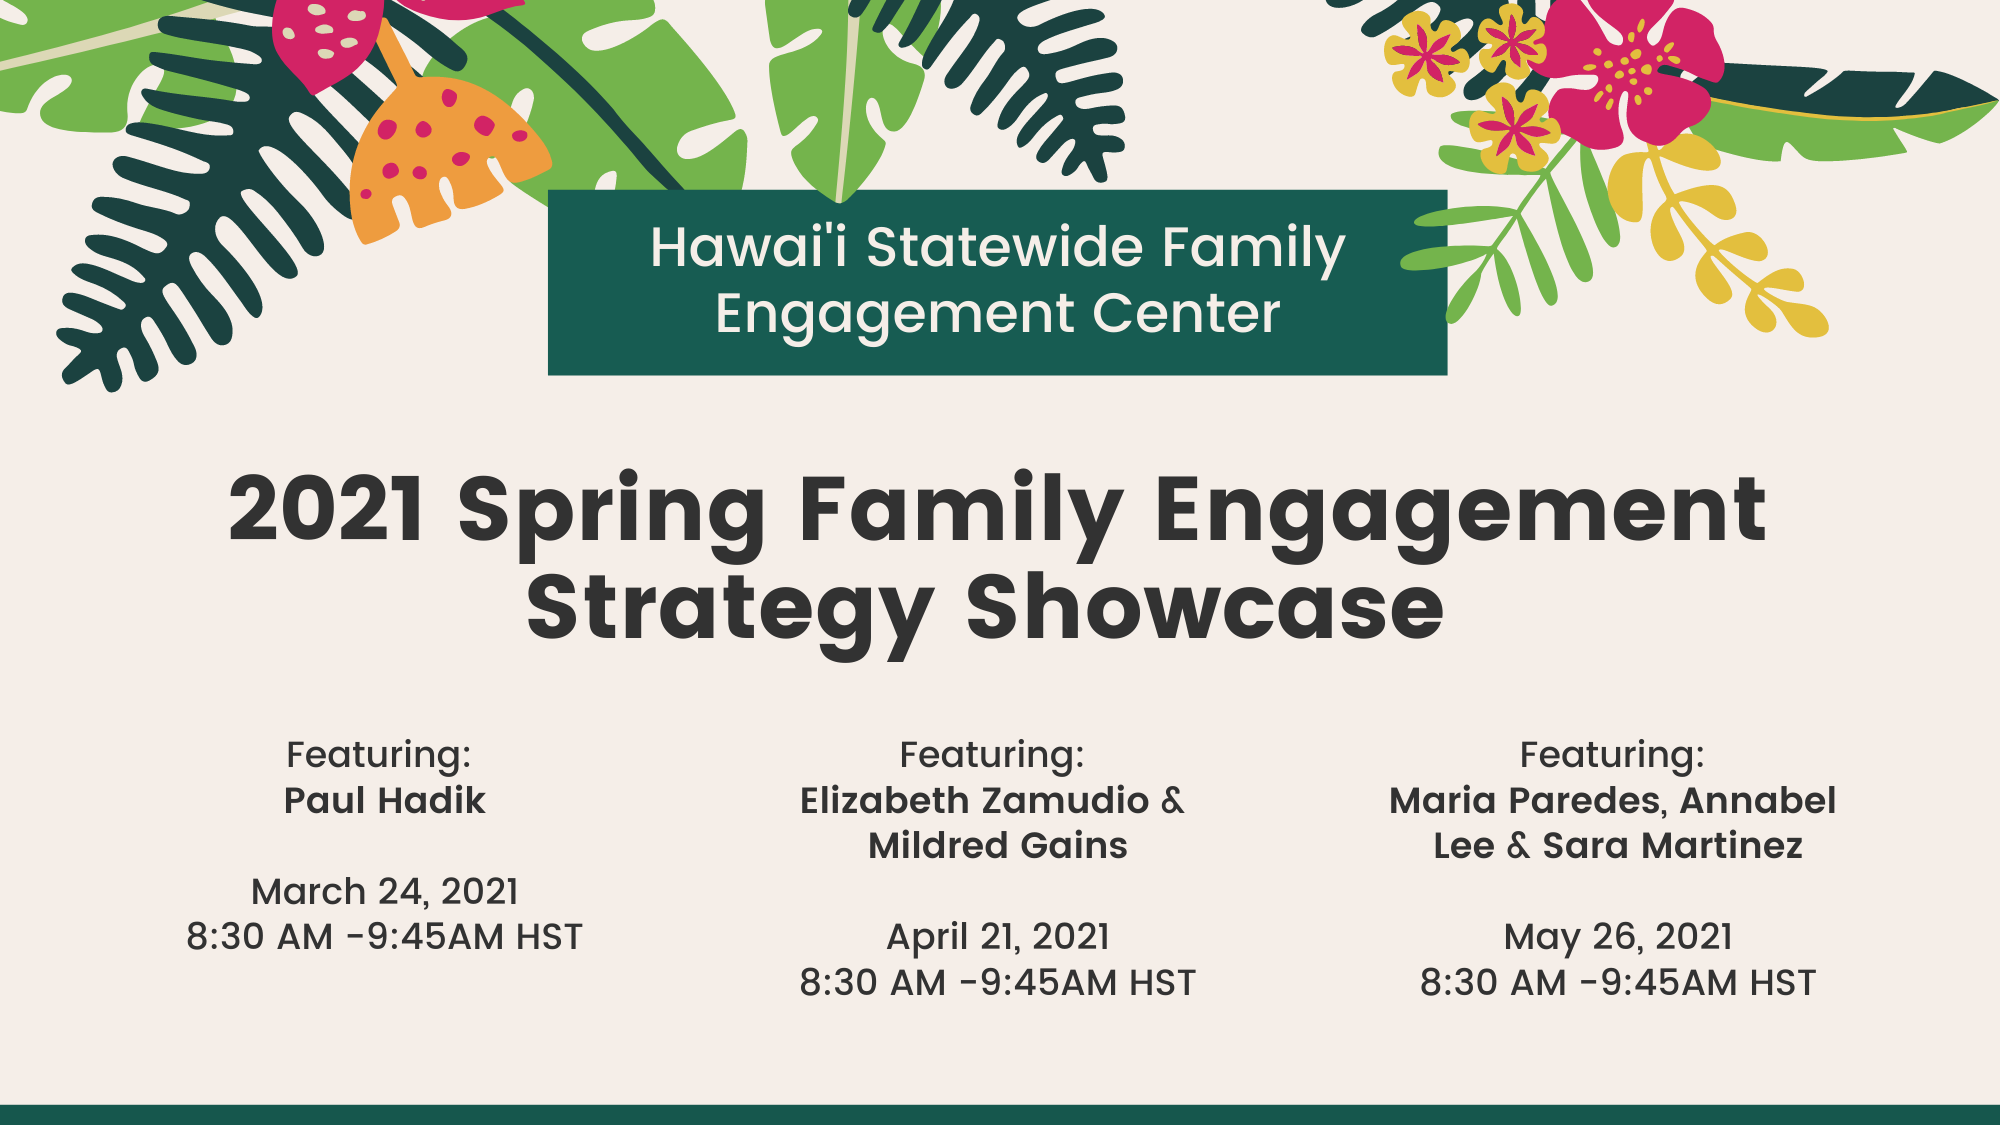 Flyer promotional for 2021 Spring Family Engagement Strategy Showcase